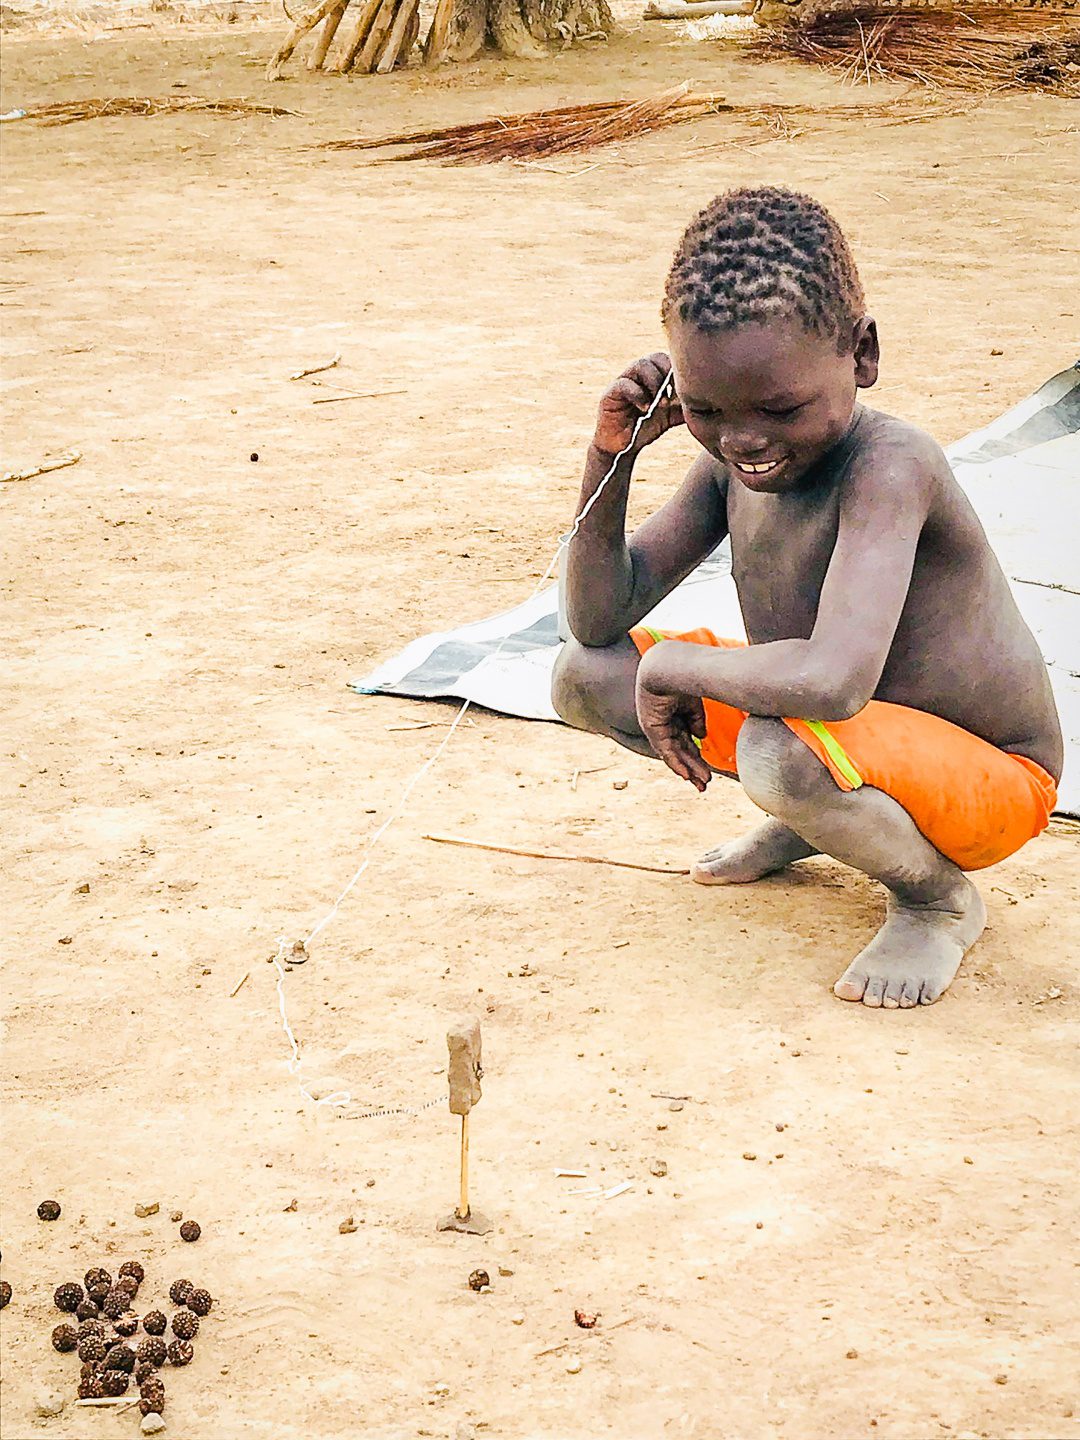 A boy in South Sudan making his own toy.